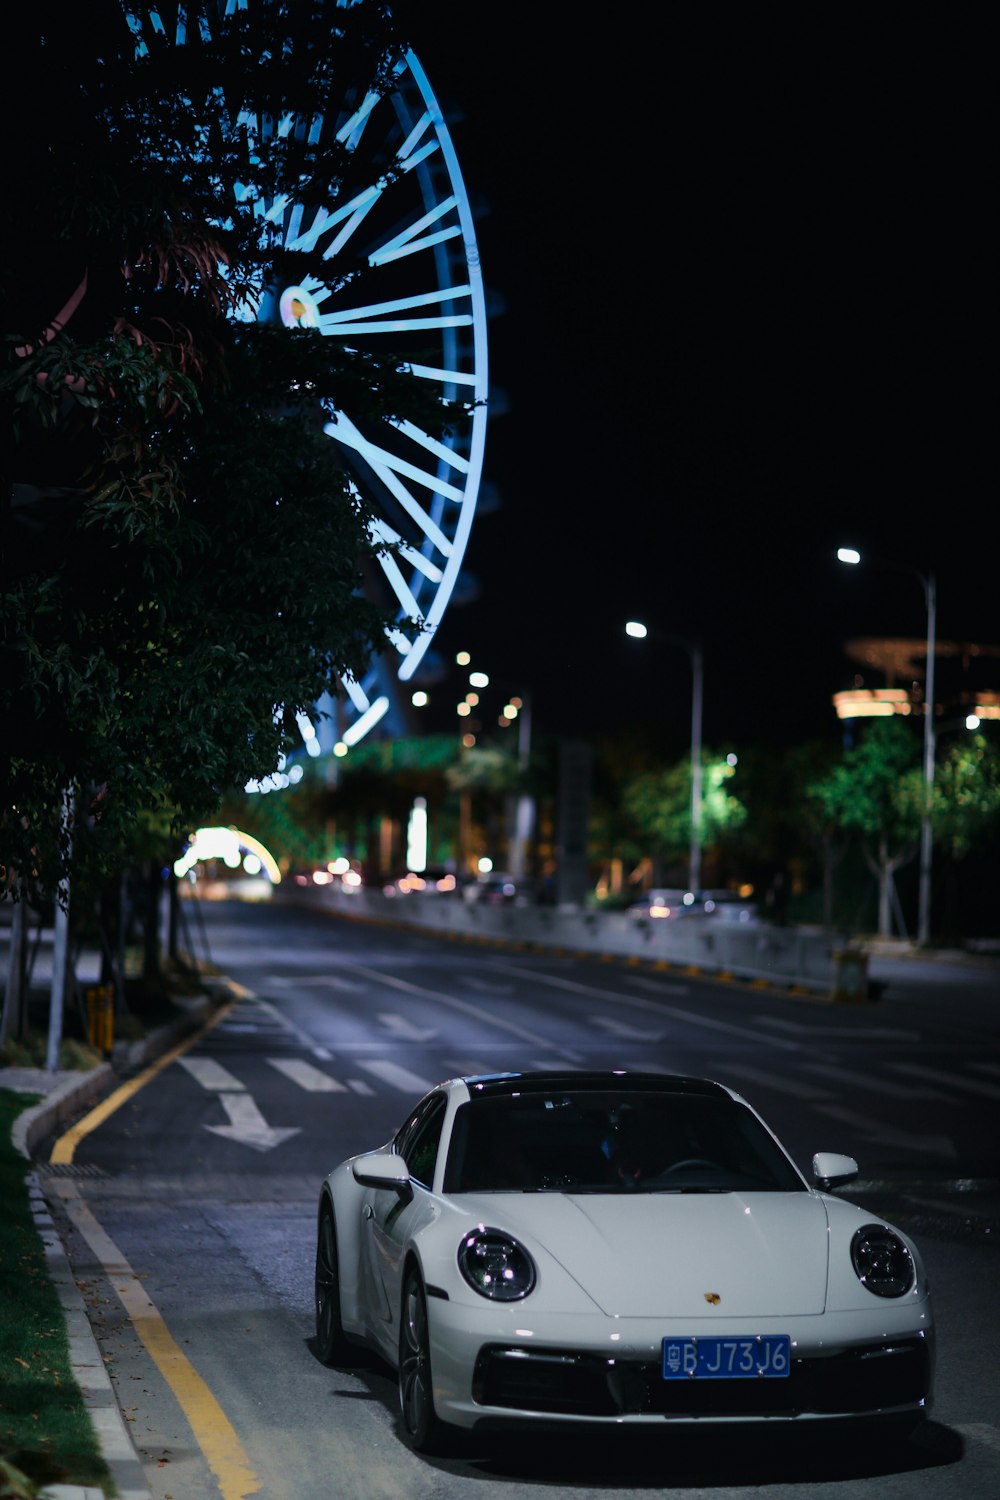 a white car on a street at night